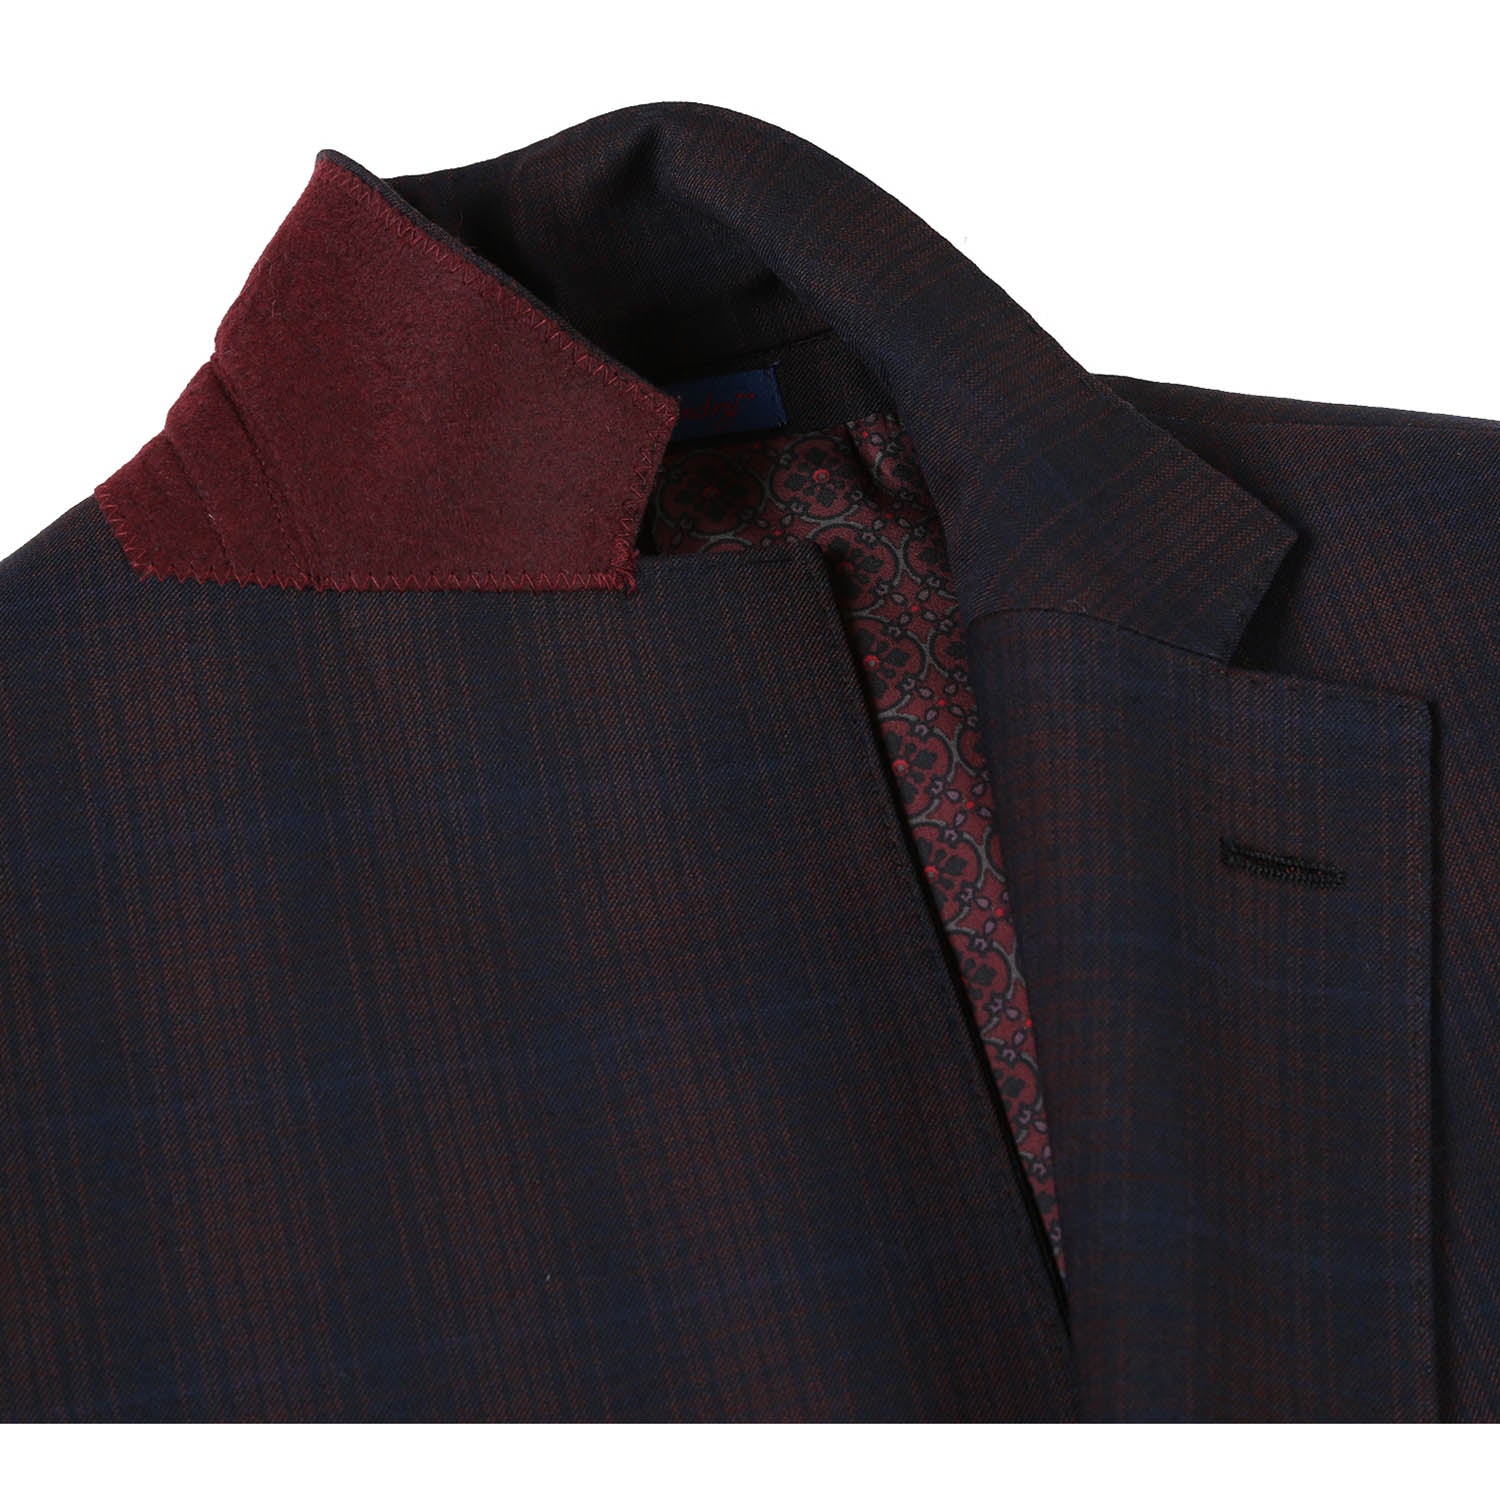 English Laundry Coffee with Red Check Suit 5